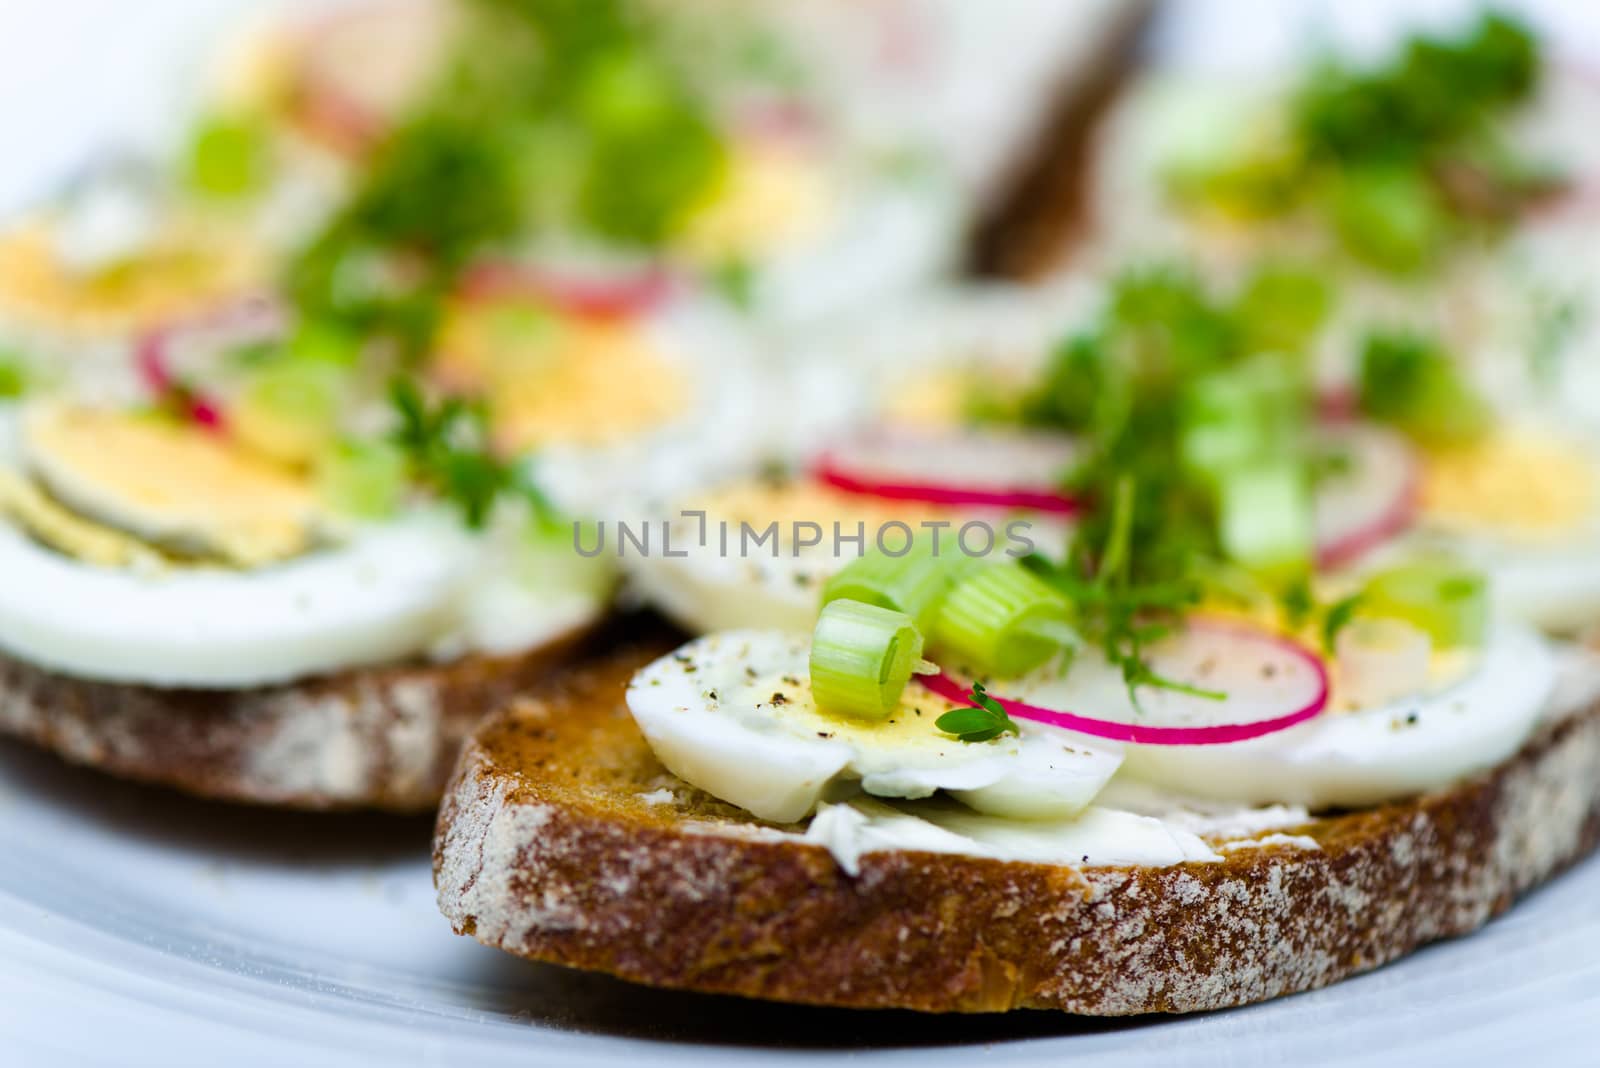 Healthy snack - wholemeal bread with egg and fresh cress and radishes